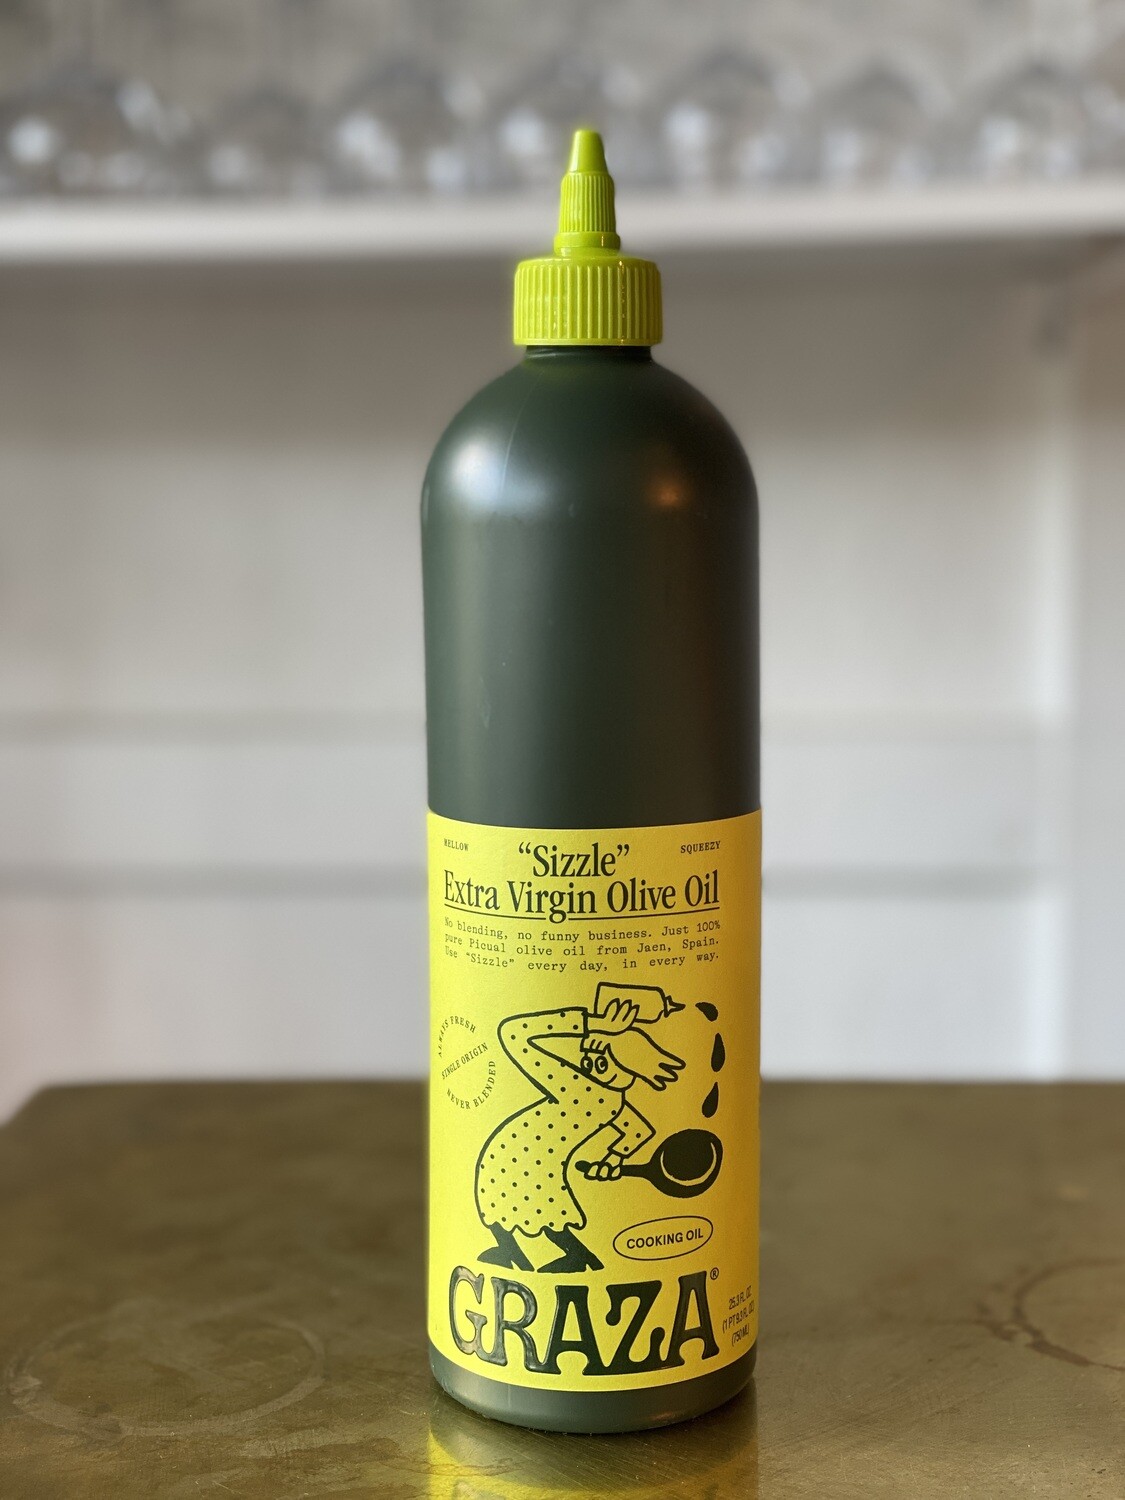 Graza 'Sizzle' Extra Virgin Olive Oil for Cooking